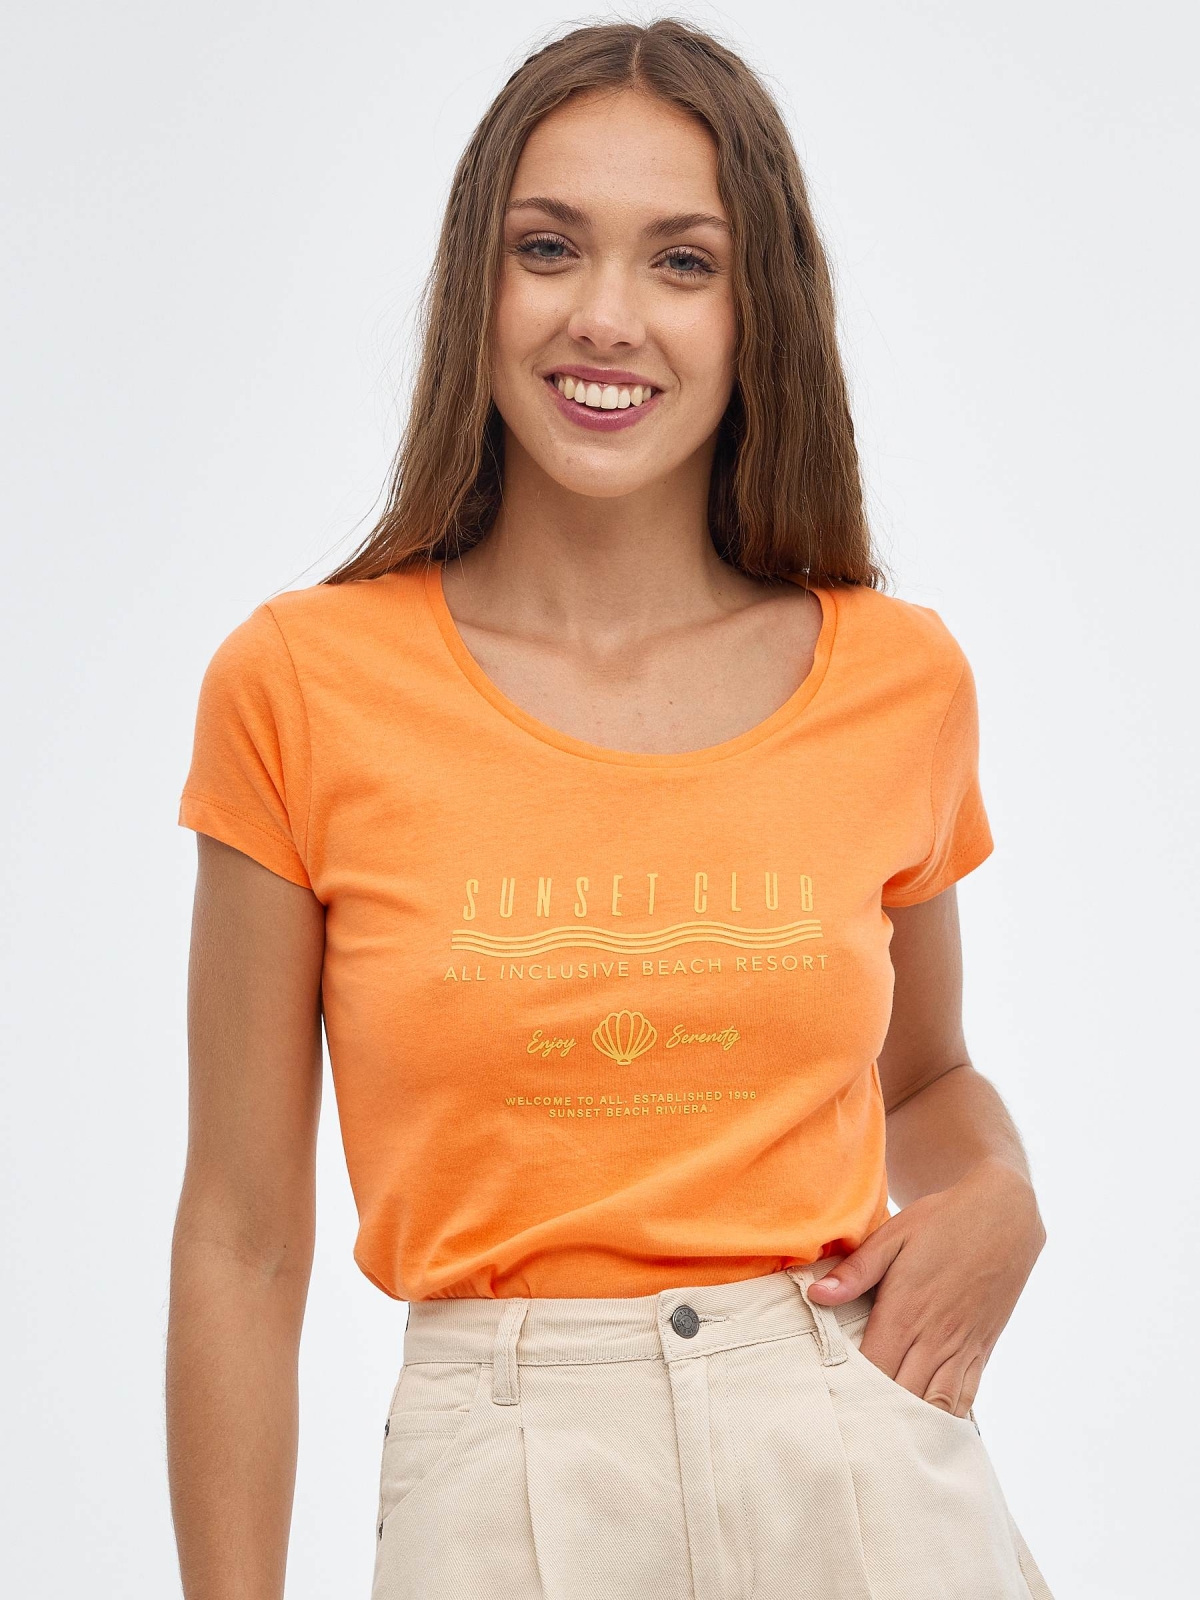 Sunsetclub crop top orange middle front view